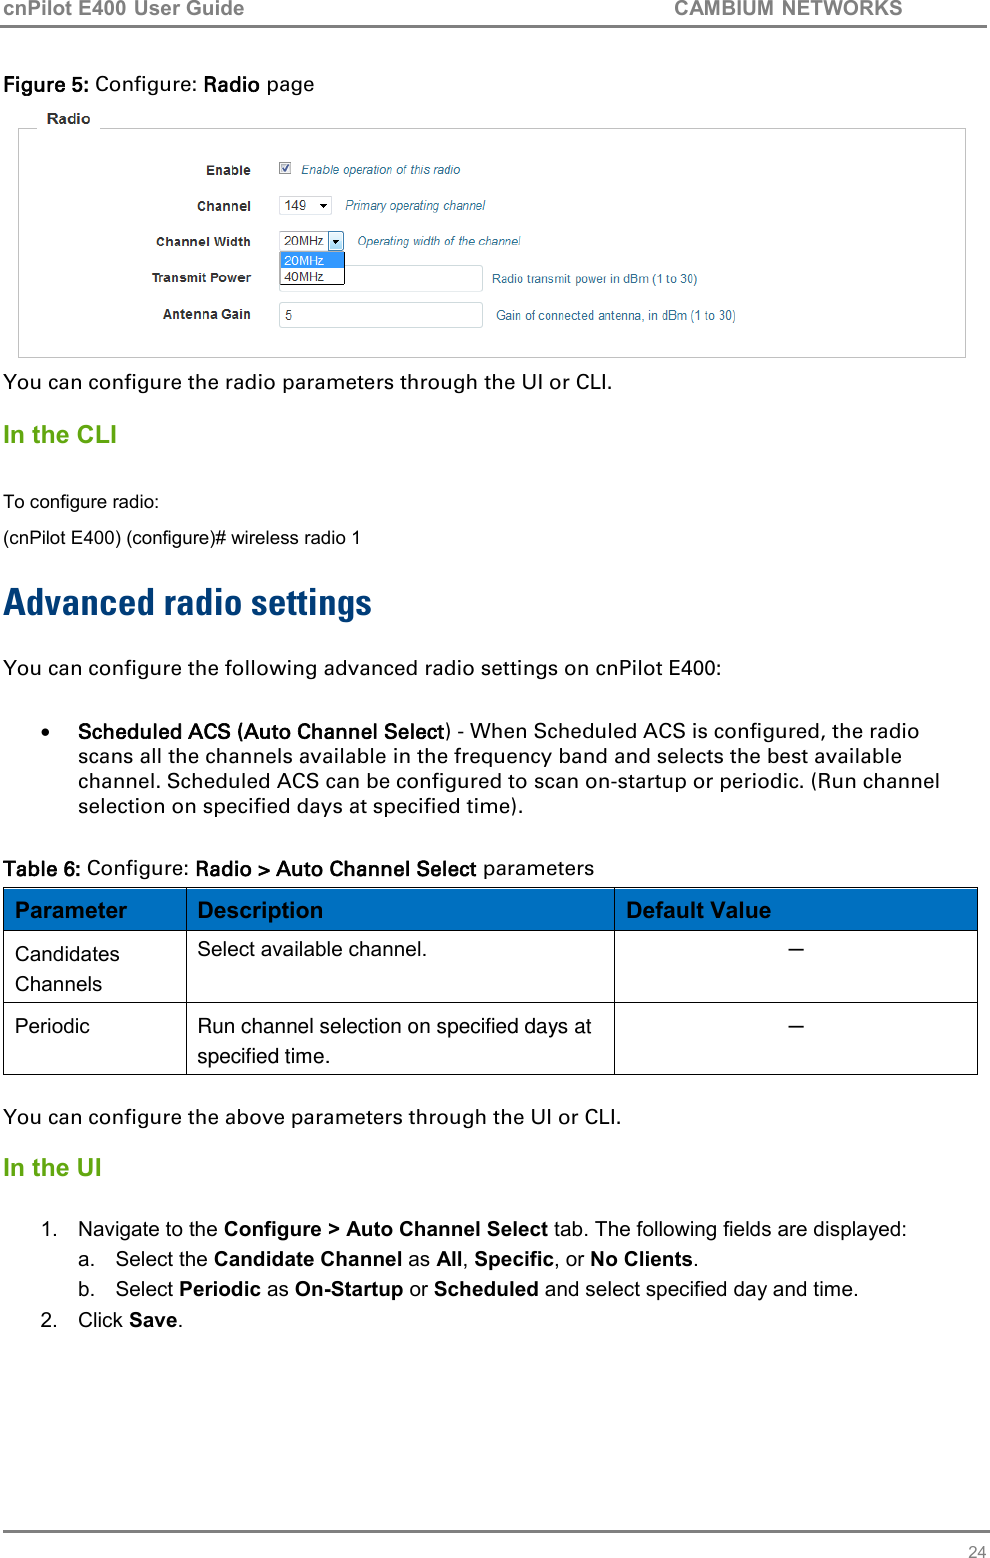 cnPilot E400 User Guide           CAMBIUM NETWORKS   24 Figure 5: Configure: Radio page  You can configure the radio parameters through the UI or CLI.  In the CLI  To configure radio: (cnPilot E400) (configure)# wireless radio 1  Advanced radio settings  You can configure the following advanced radio settings on cnPilot E400:    Scheduled ACS (Auto Channel Select) - When Scheduled ACS is configured, the radio scans all the channels available in the frequency band and selects the best available channel. Scheduled ACS can be configured to scan on-startup or periodic. (Run channel selection on specified days at specified time).  Table 6: Configure: Radio &gt; Auto Channel Select parameters Parameter Description Default Value Candidates Channels Select available channel. ─ Periodic Run channel selection on specified days at specified time. ─  You can configure the above parameters through the UI or CLI.  In the UI  1.  Navigate to the Configure &gt; Auto Channel Select tab. The following fields are displayed: a.  Select the Candidate Channel as All, Specific, or No Clients.  b.  Select Periodic as On-Startup or Scheduled and select specified day and time. 2.  Click Save.    